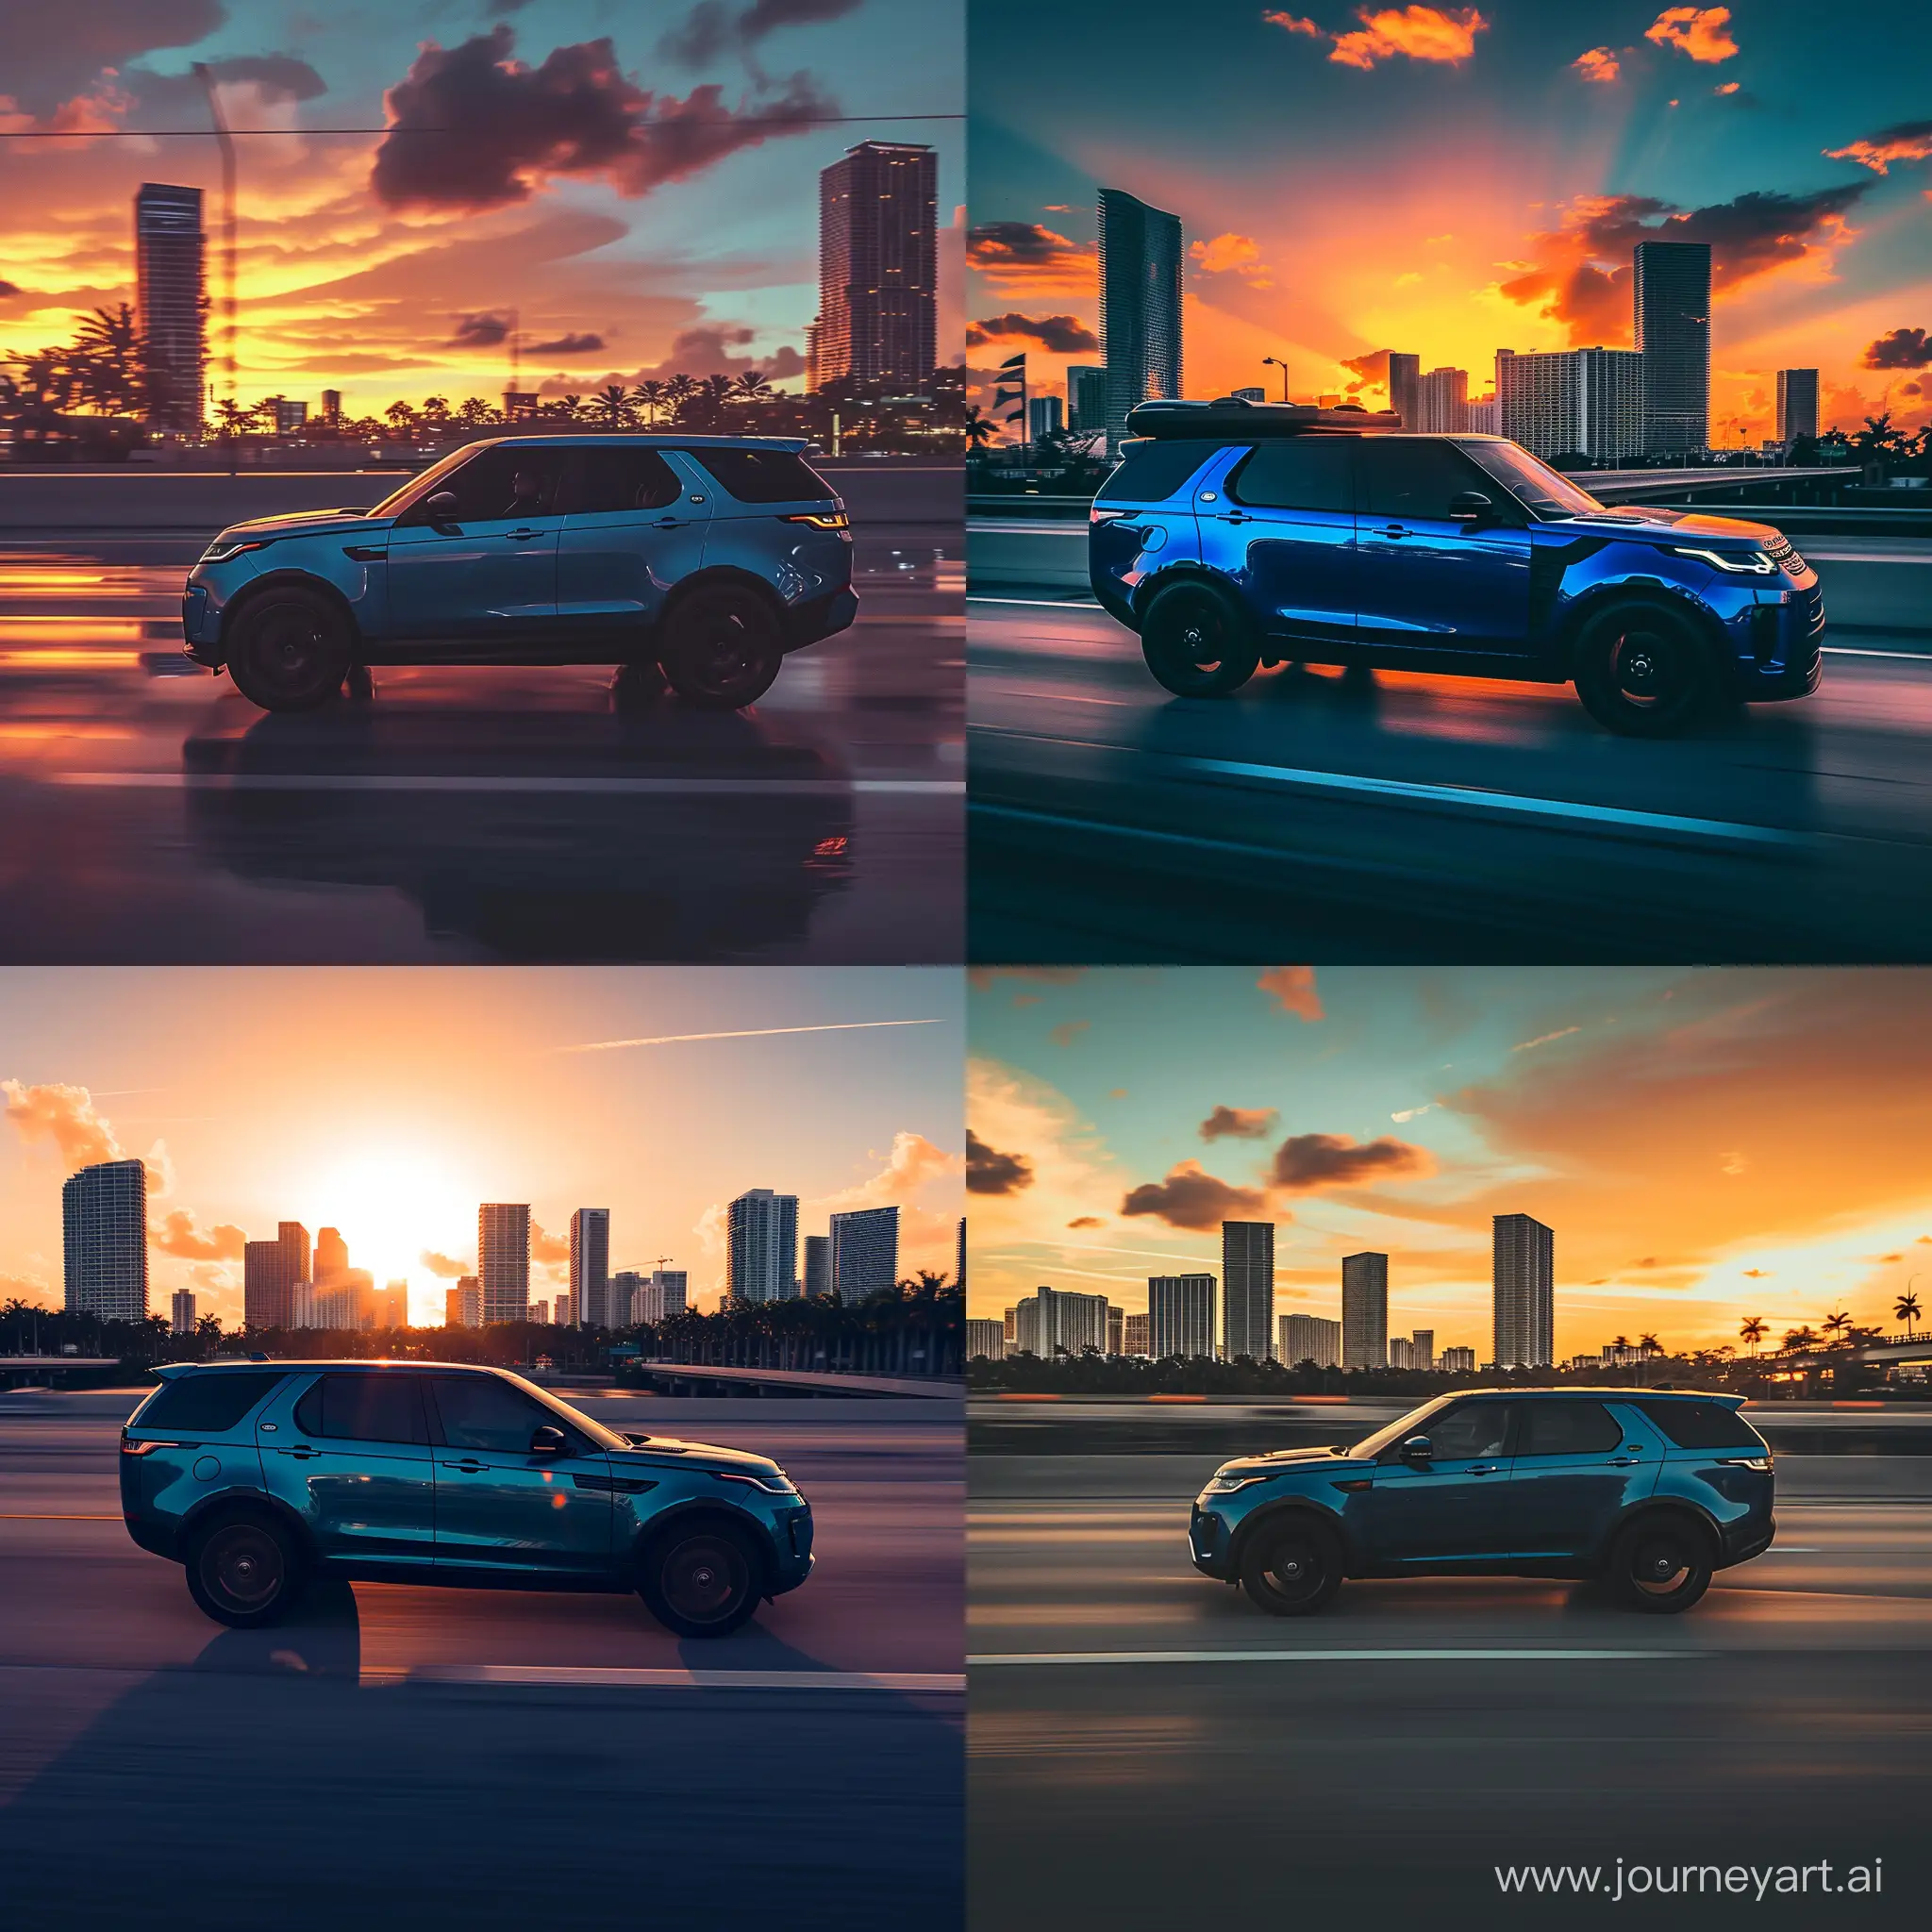 GTA Style Picture Side View of: Blue Landrover Discovery 2023 on Highway, Miami City: Sunset, Realistic Sunlight Reflections, Wide Shot, High Precision